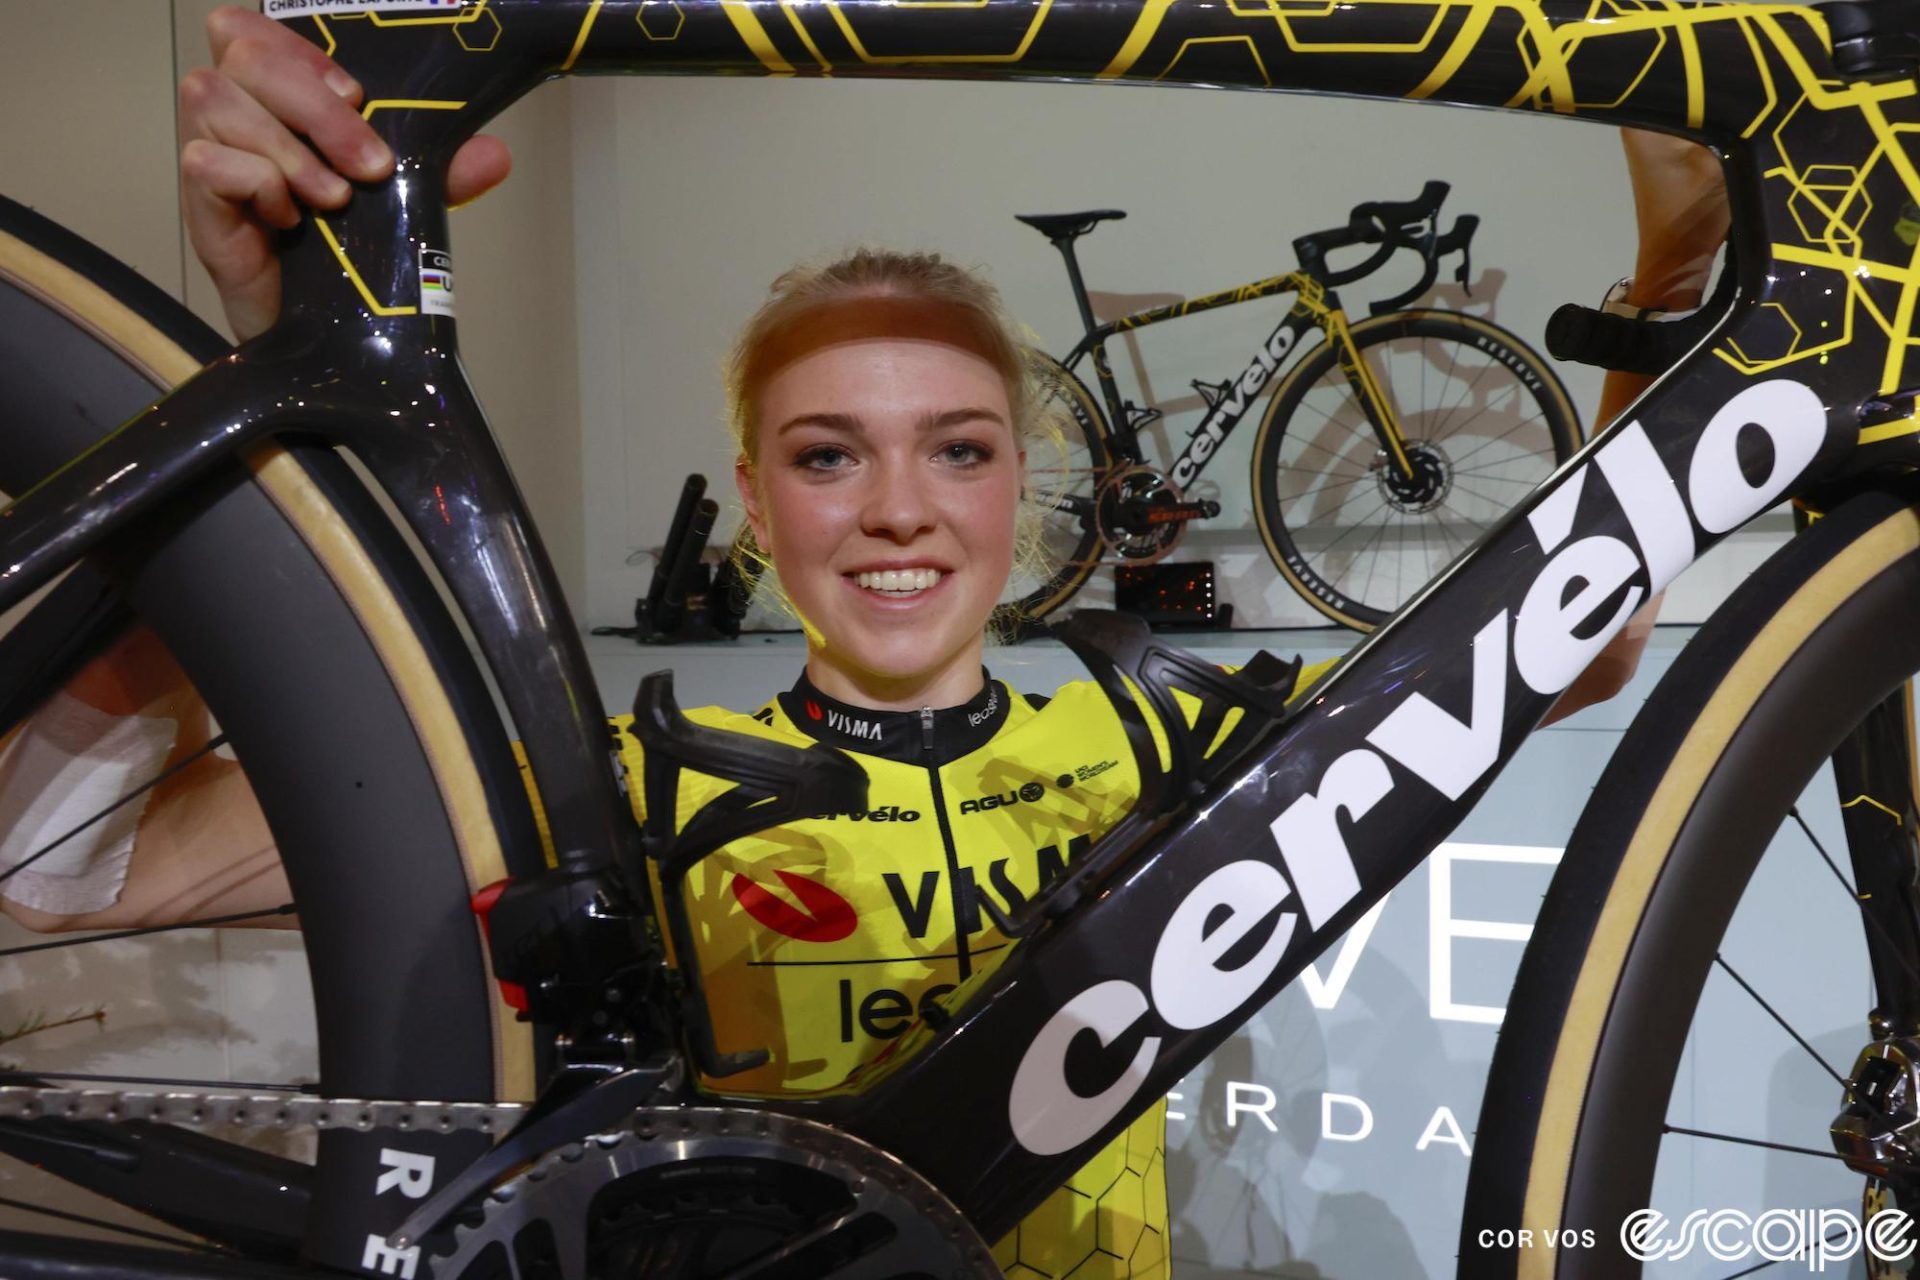 Fem van Empel holds up a Cervelo S5 road bike in team paint at the Visma-Lease a Bike team presentation. She's wearing the team's bright yellow and black kit and smiling as she's framed by the bike's main tubes.